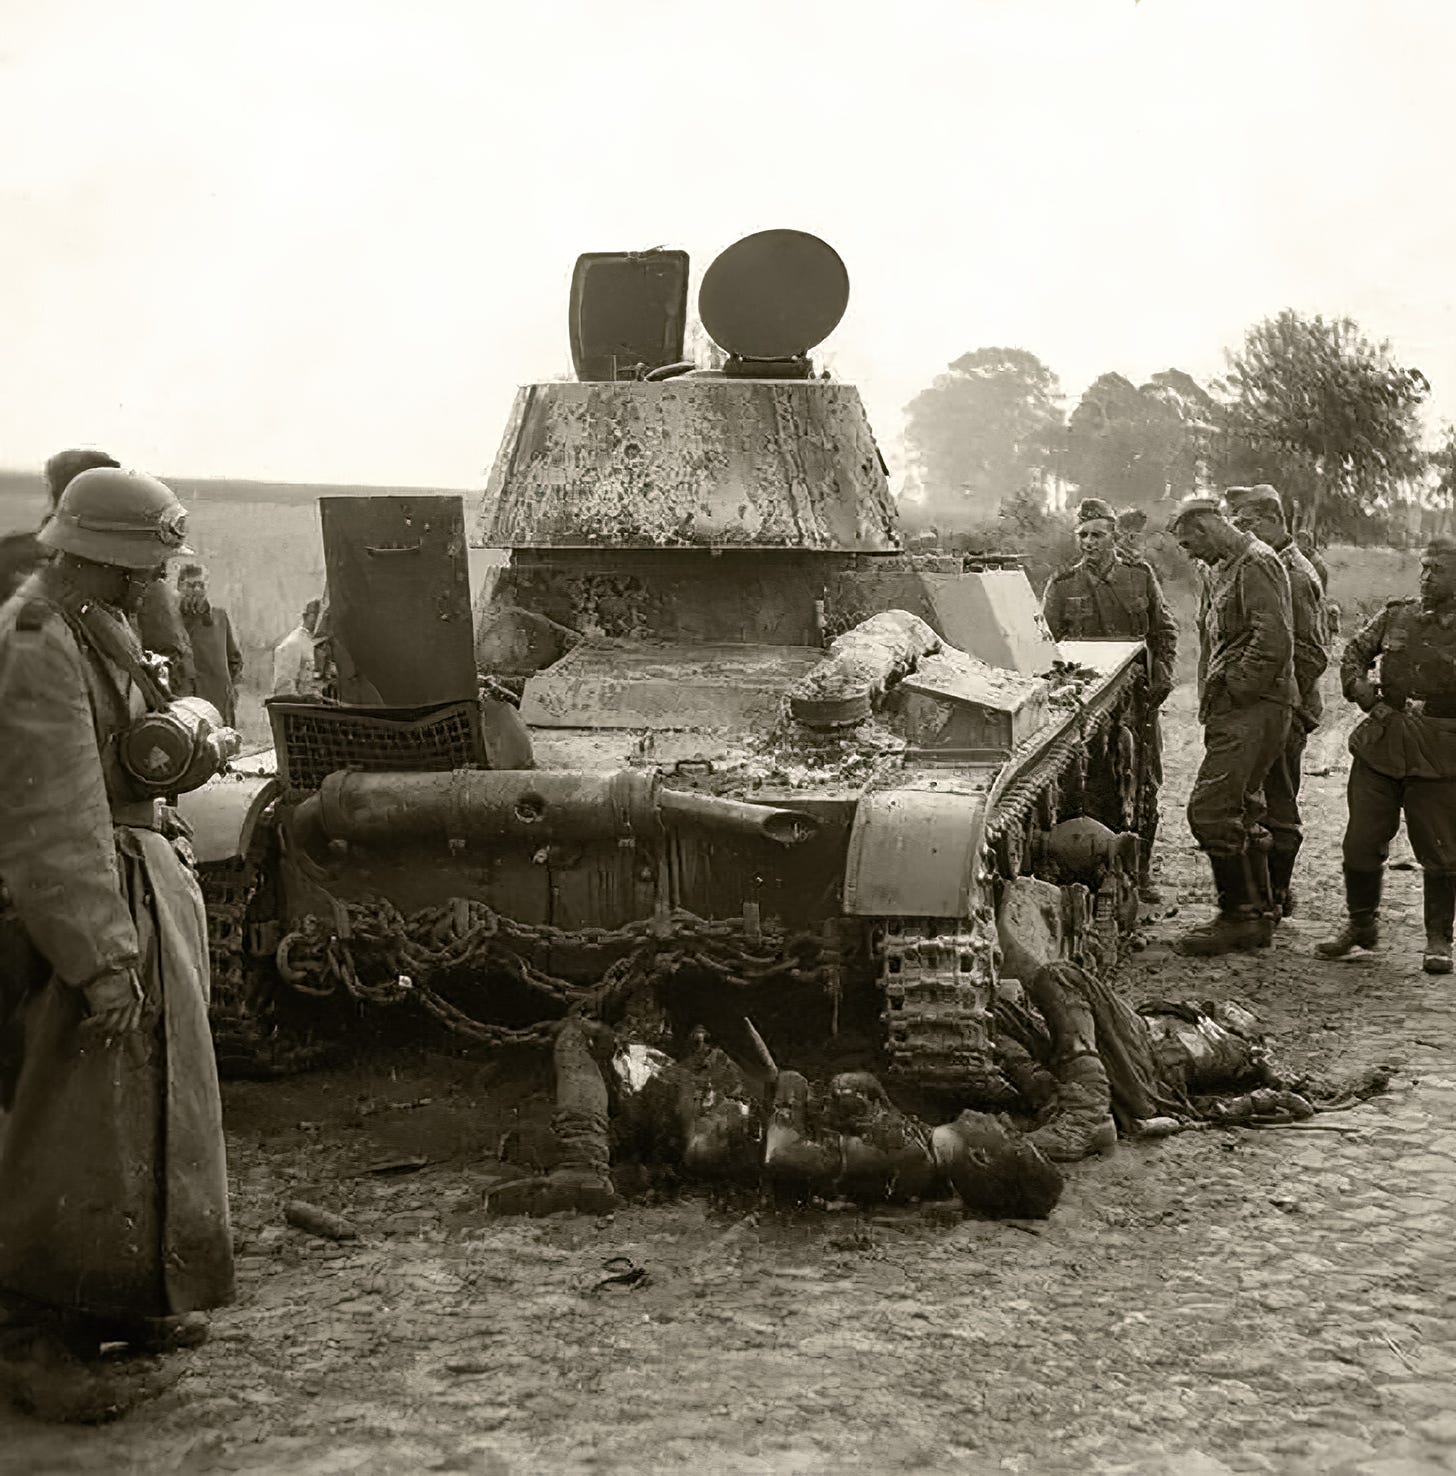 Two young soldiers lie sprawled in death beside their wrecked tank